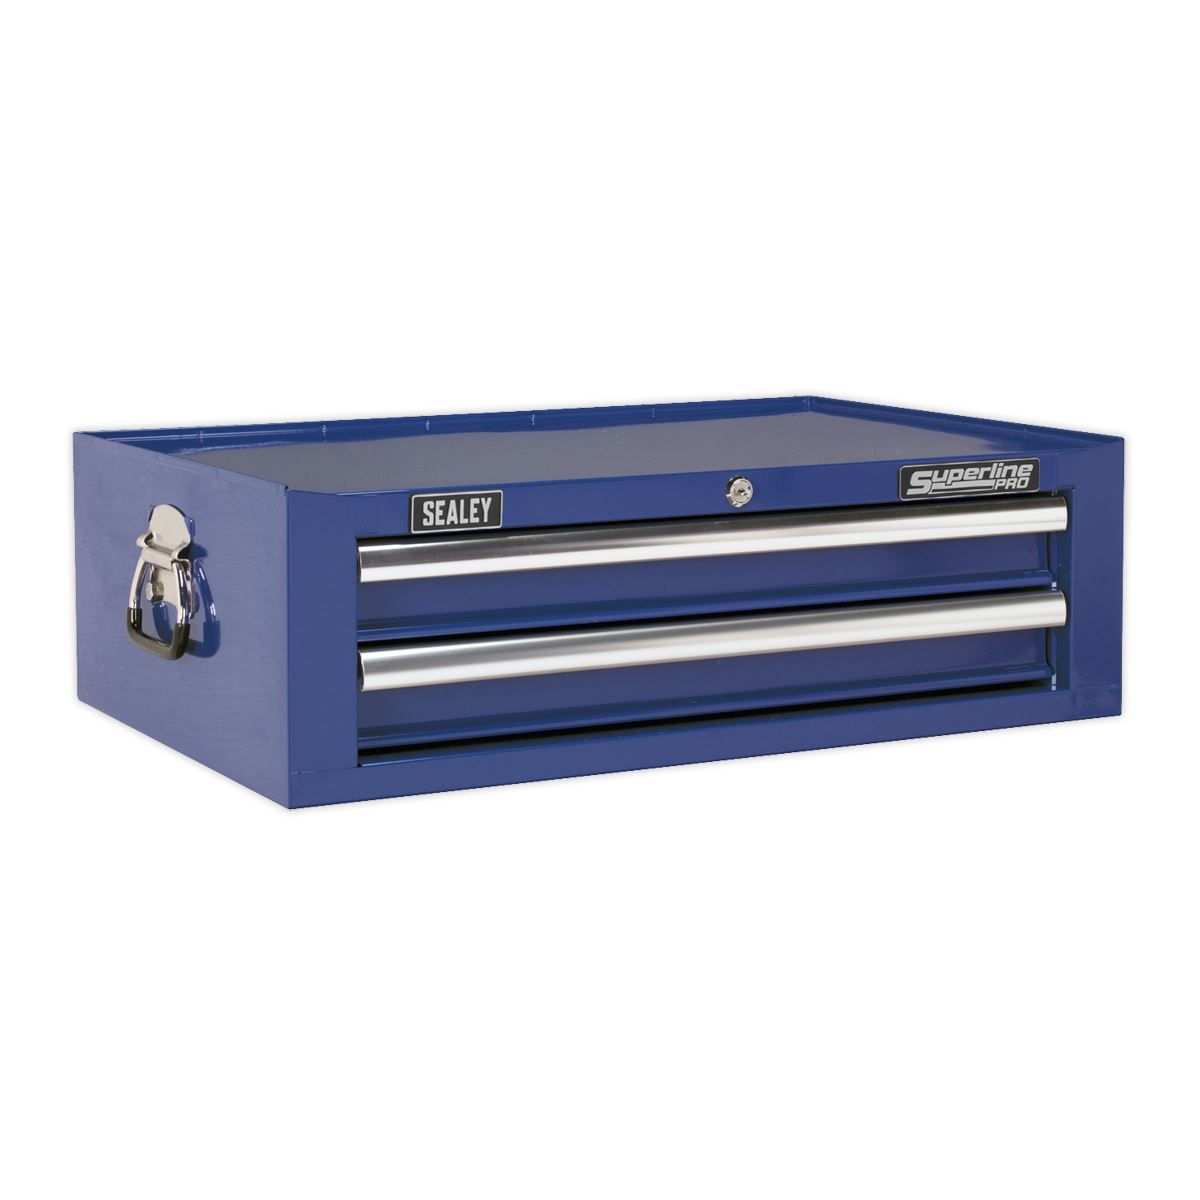 Sealey Superline Pro Mid-Box 2 Drawer Tool Chest with Ball-Bearing Slides - Blue